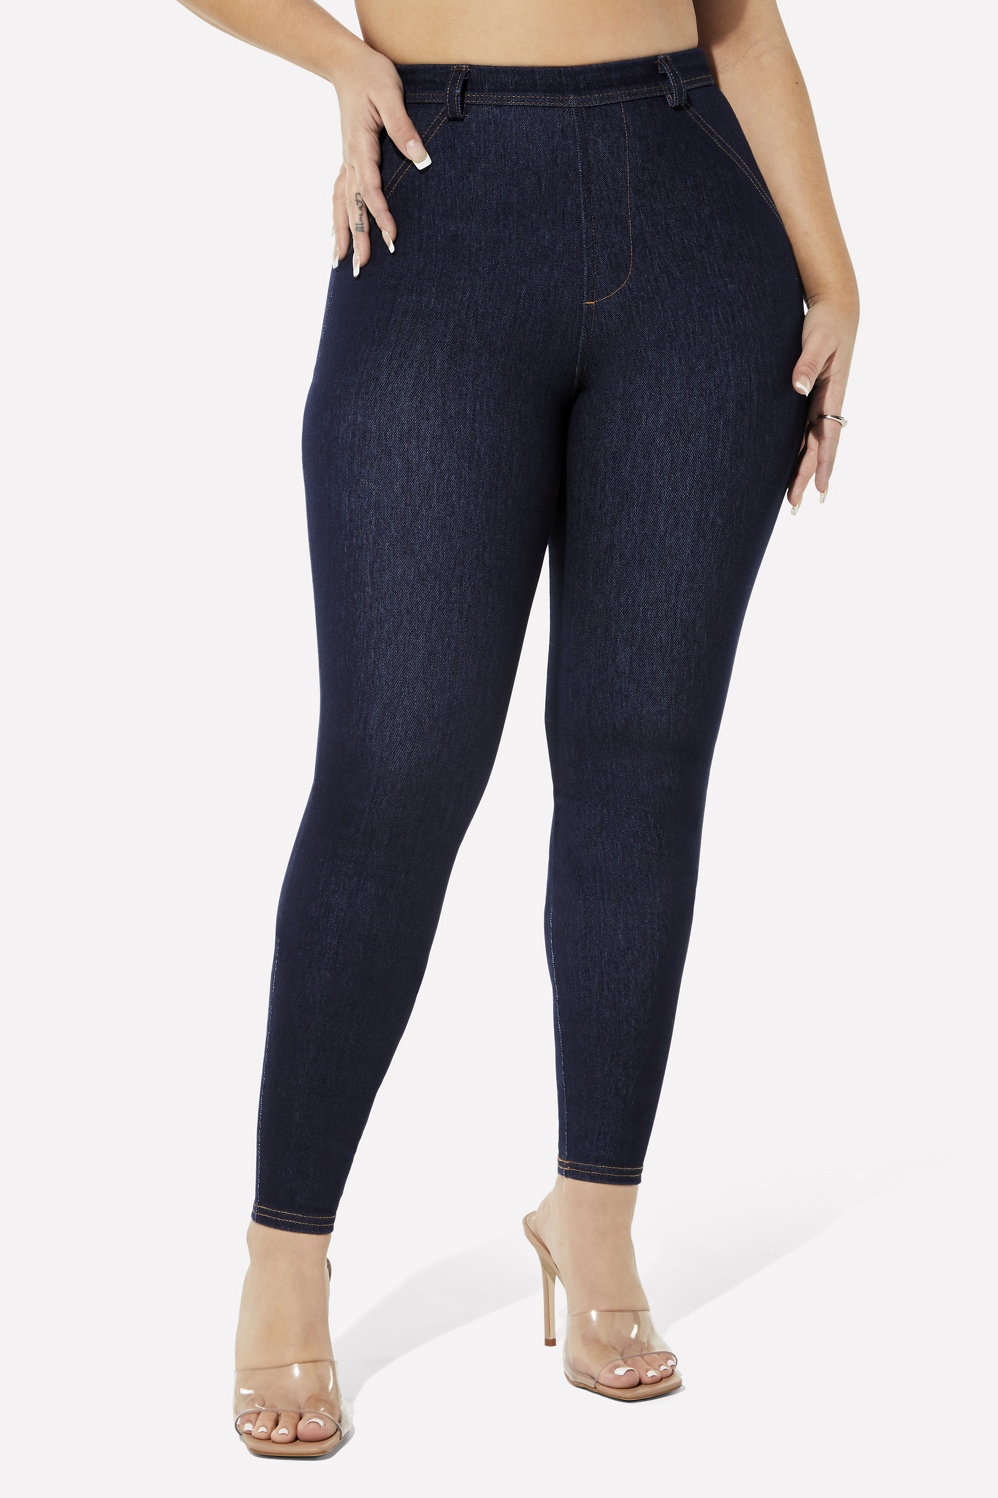 Served - Jean Denim Smoothing Is Yitty Stretch